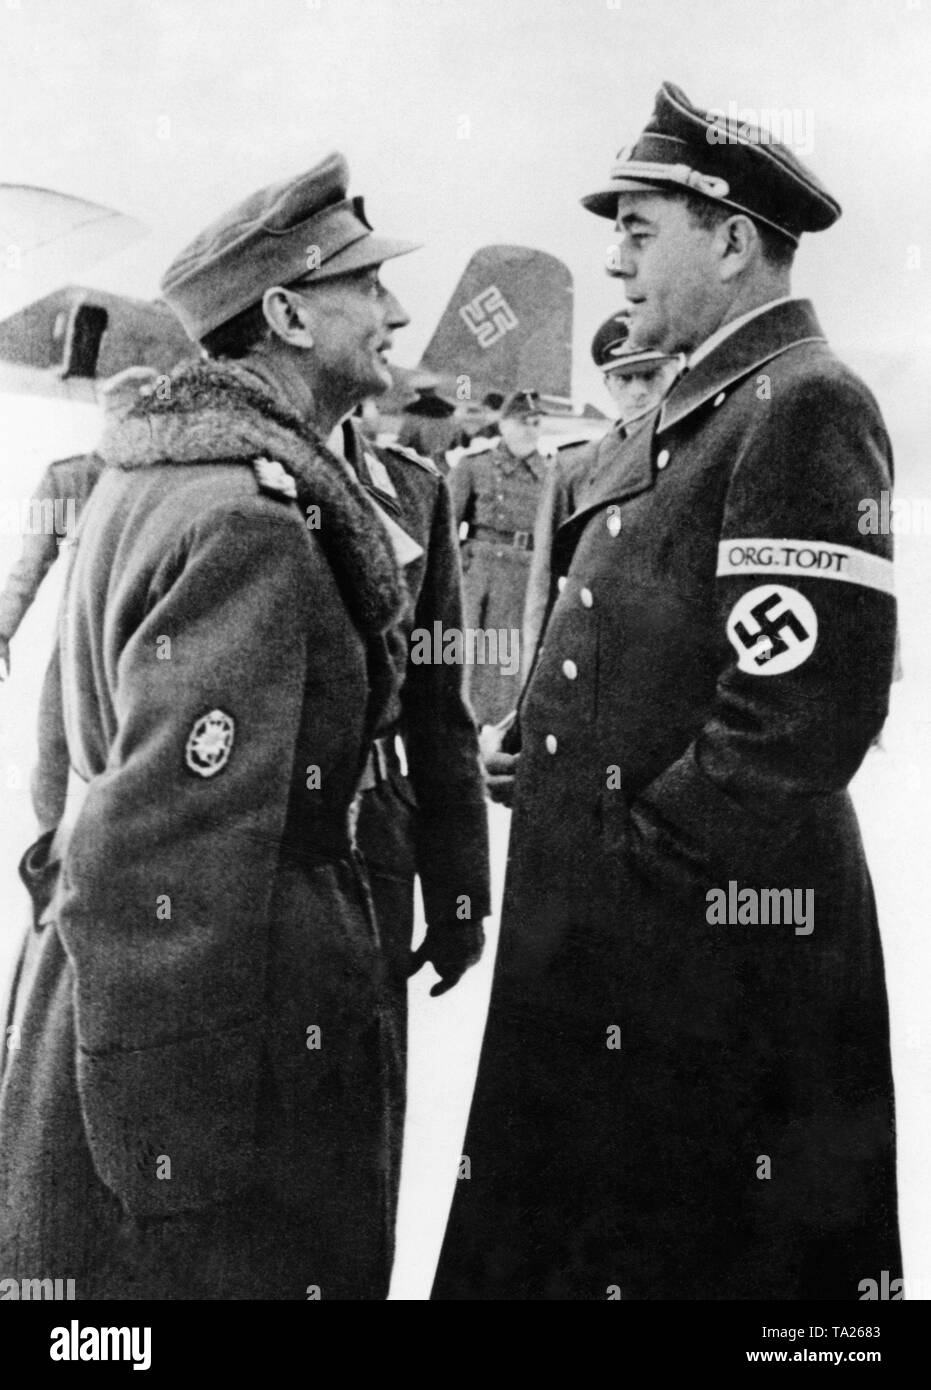 Eduard Dietl and Albert Speer talk at a field airport at the polar circle in Rovaniemi. Albert Speer is Reich Minister for Armament and Ammunition and at the same time is responsible for the organization Todt, whose armband he wears in the picture. Dietl wears a sign of the Gebirgsjaeger (mountain infantry) on his arm. In the background a Focke-Wulf Fw 200. Stock Photo